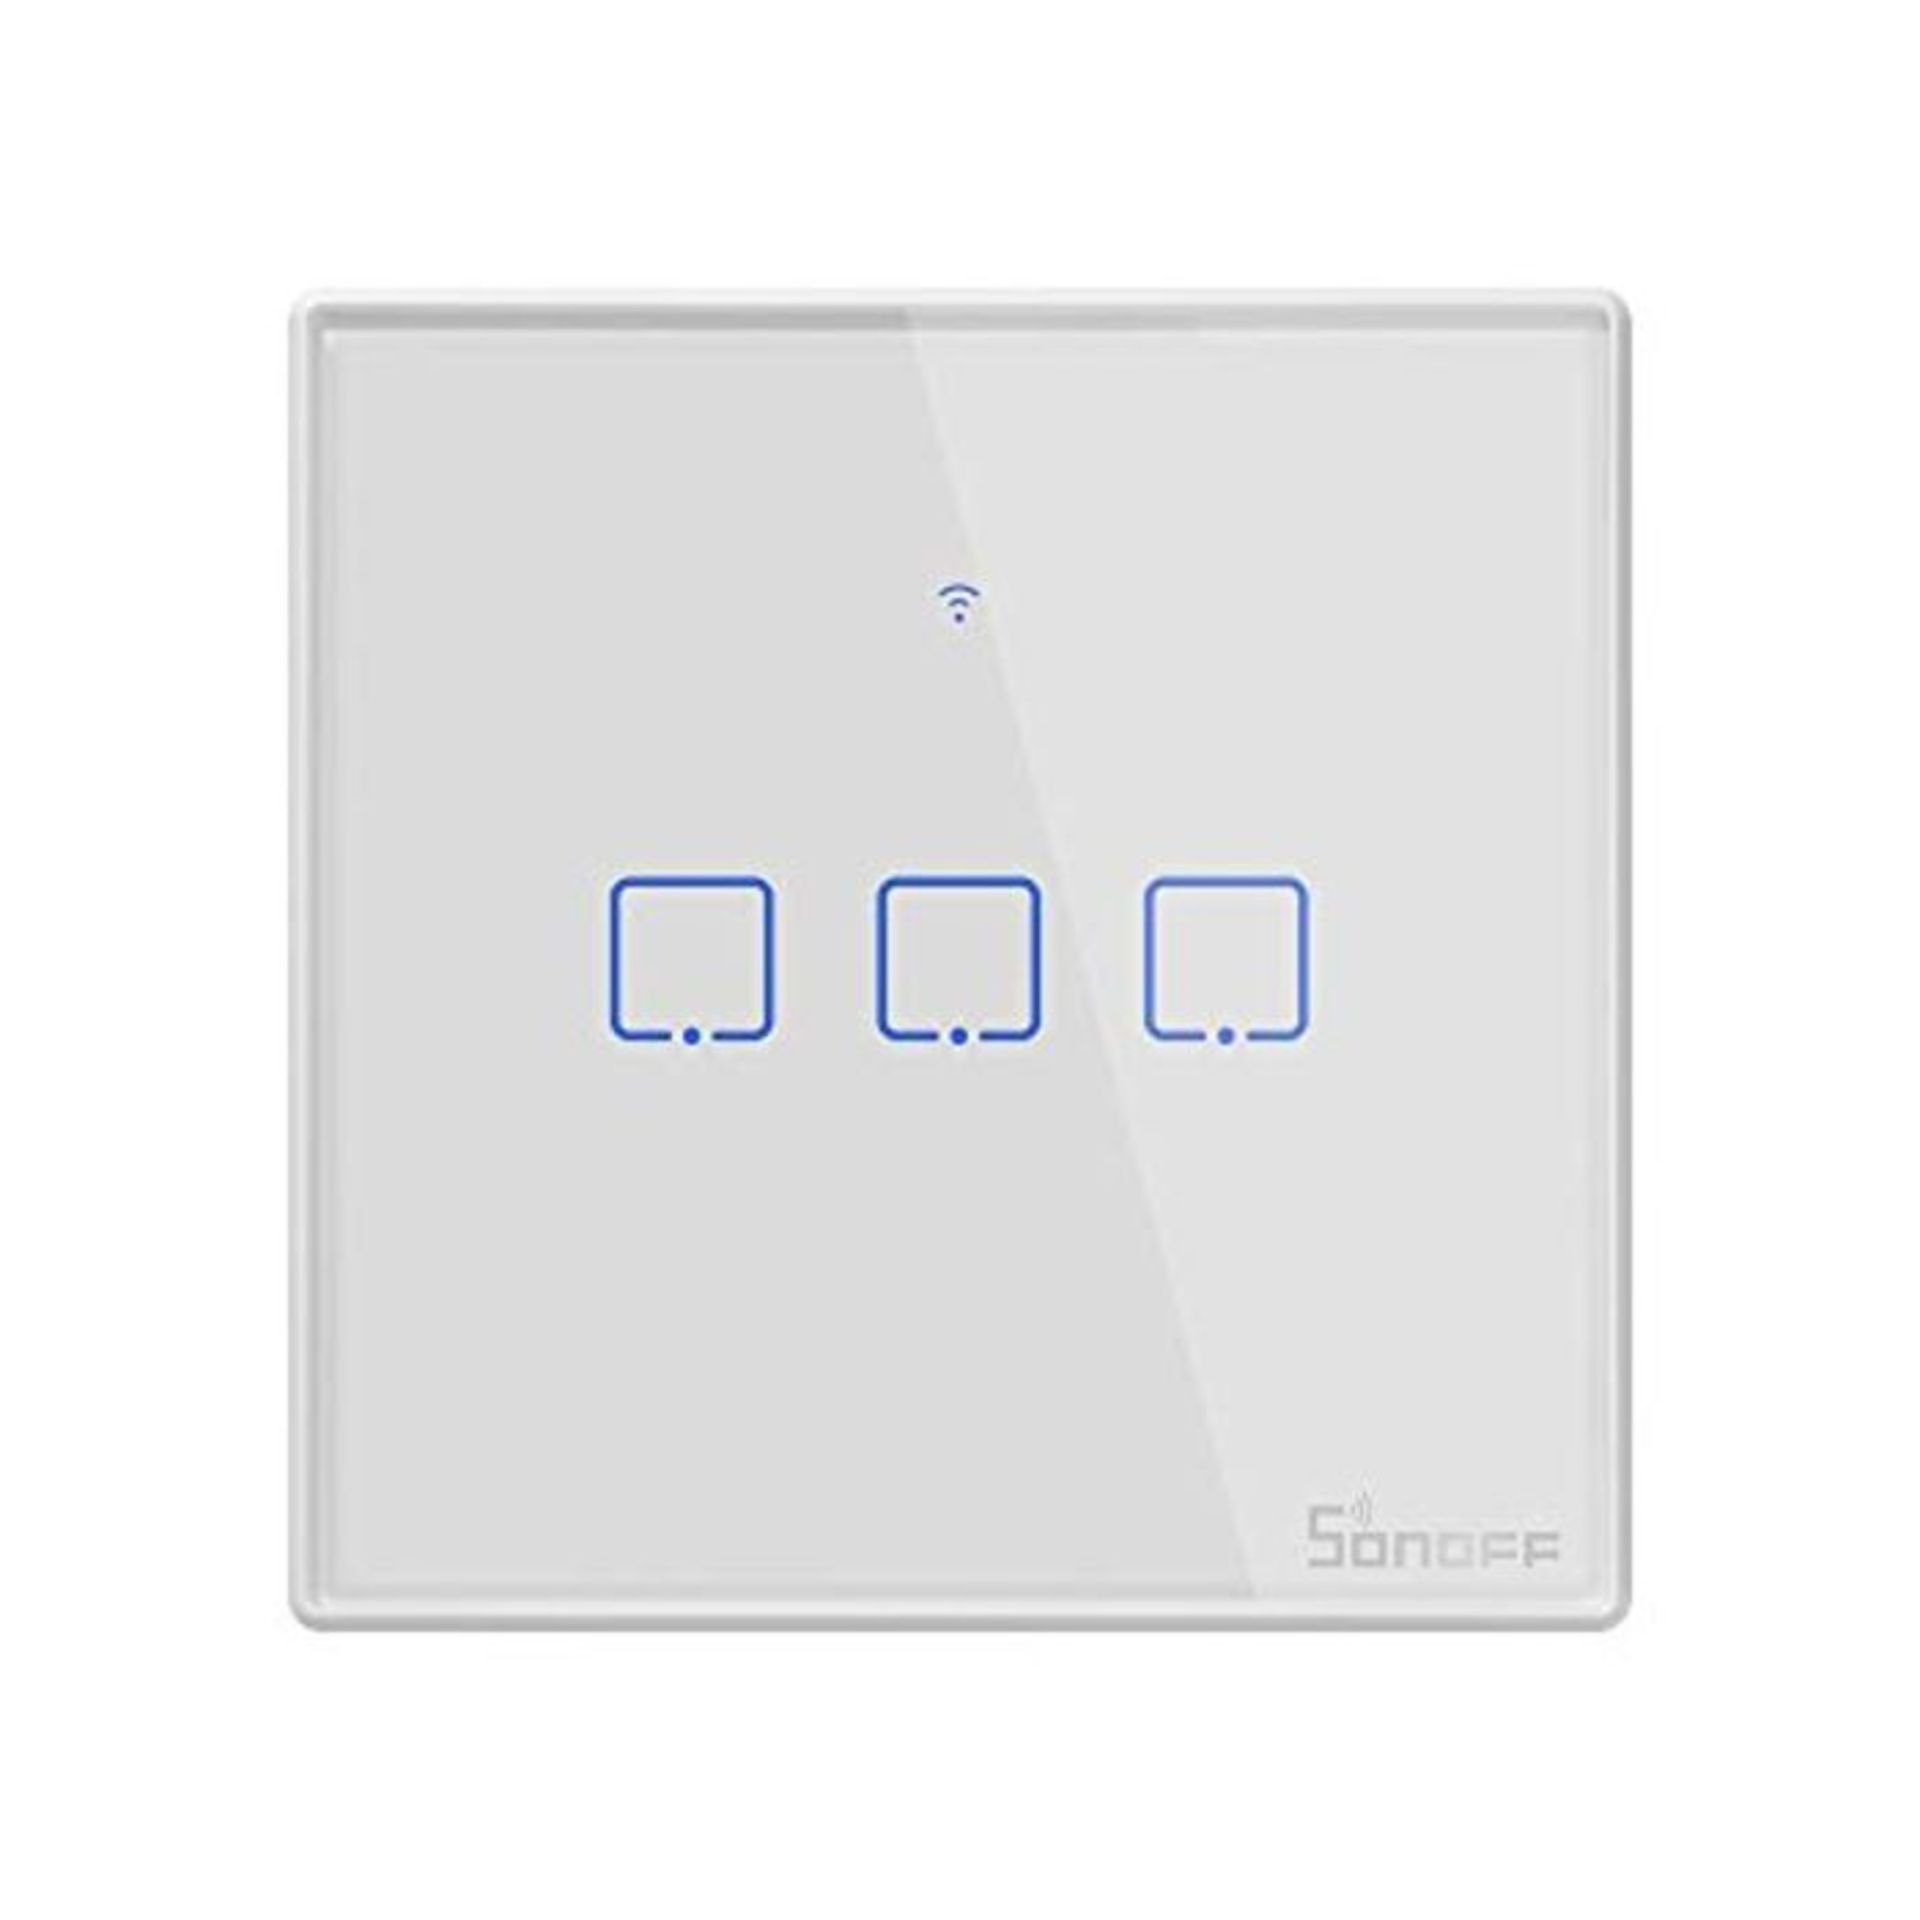 Smart Light Switch,SONOFF WiFi Touch Wall Light Switches Works with Alexa and Google H